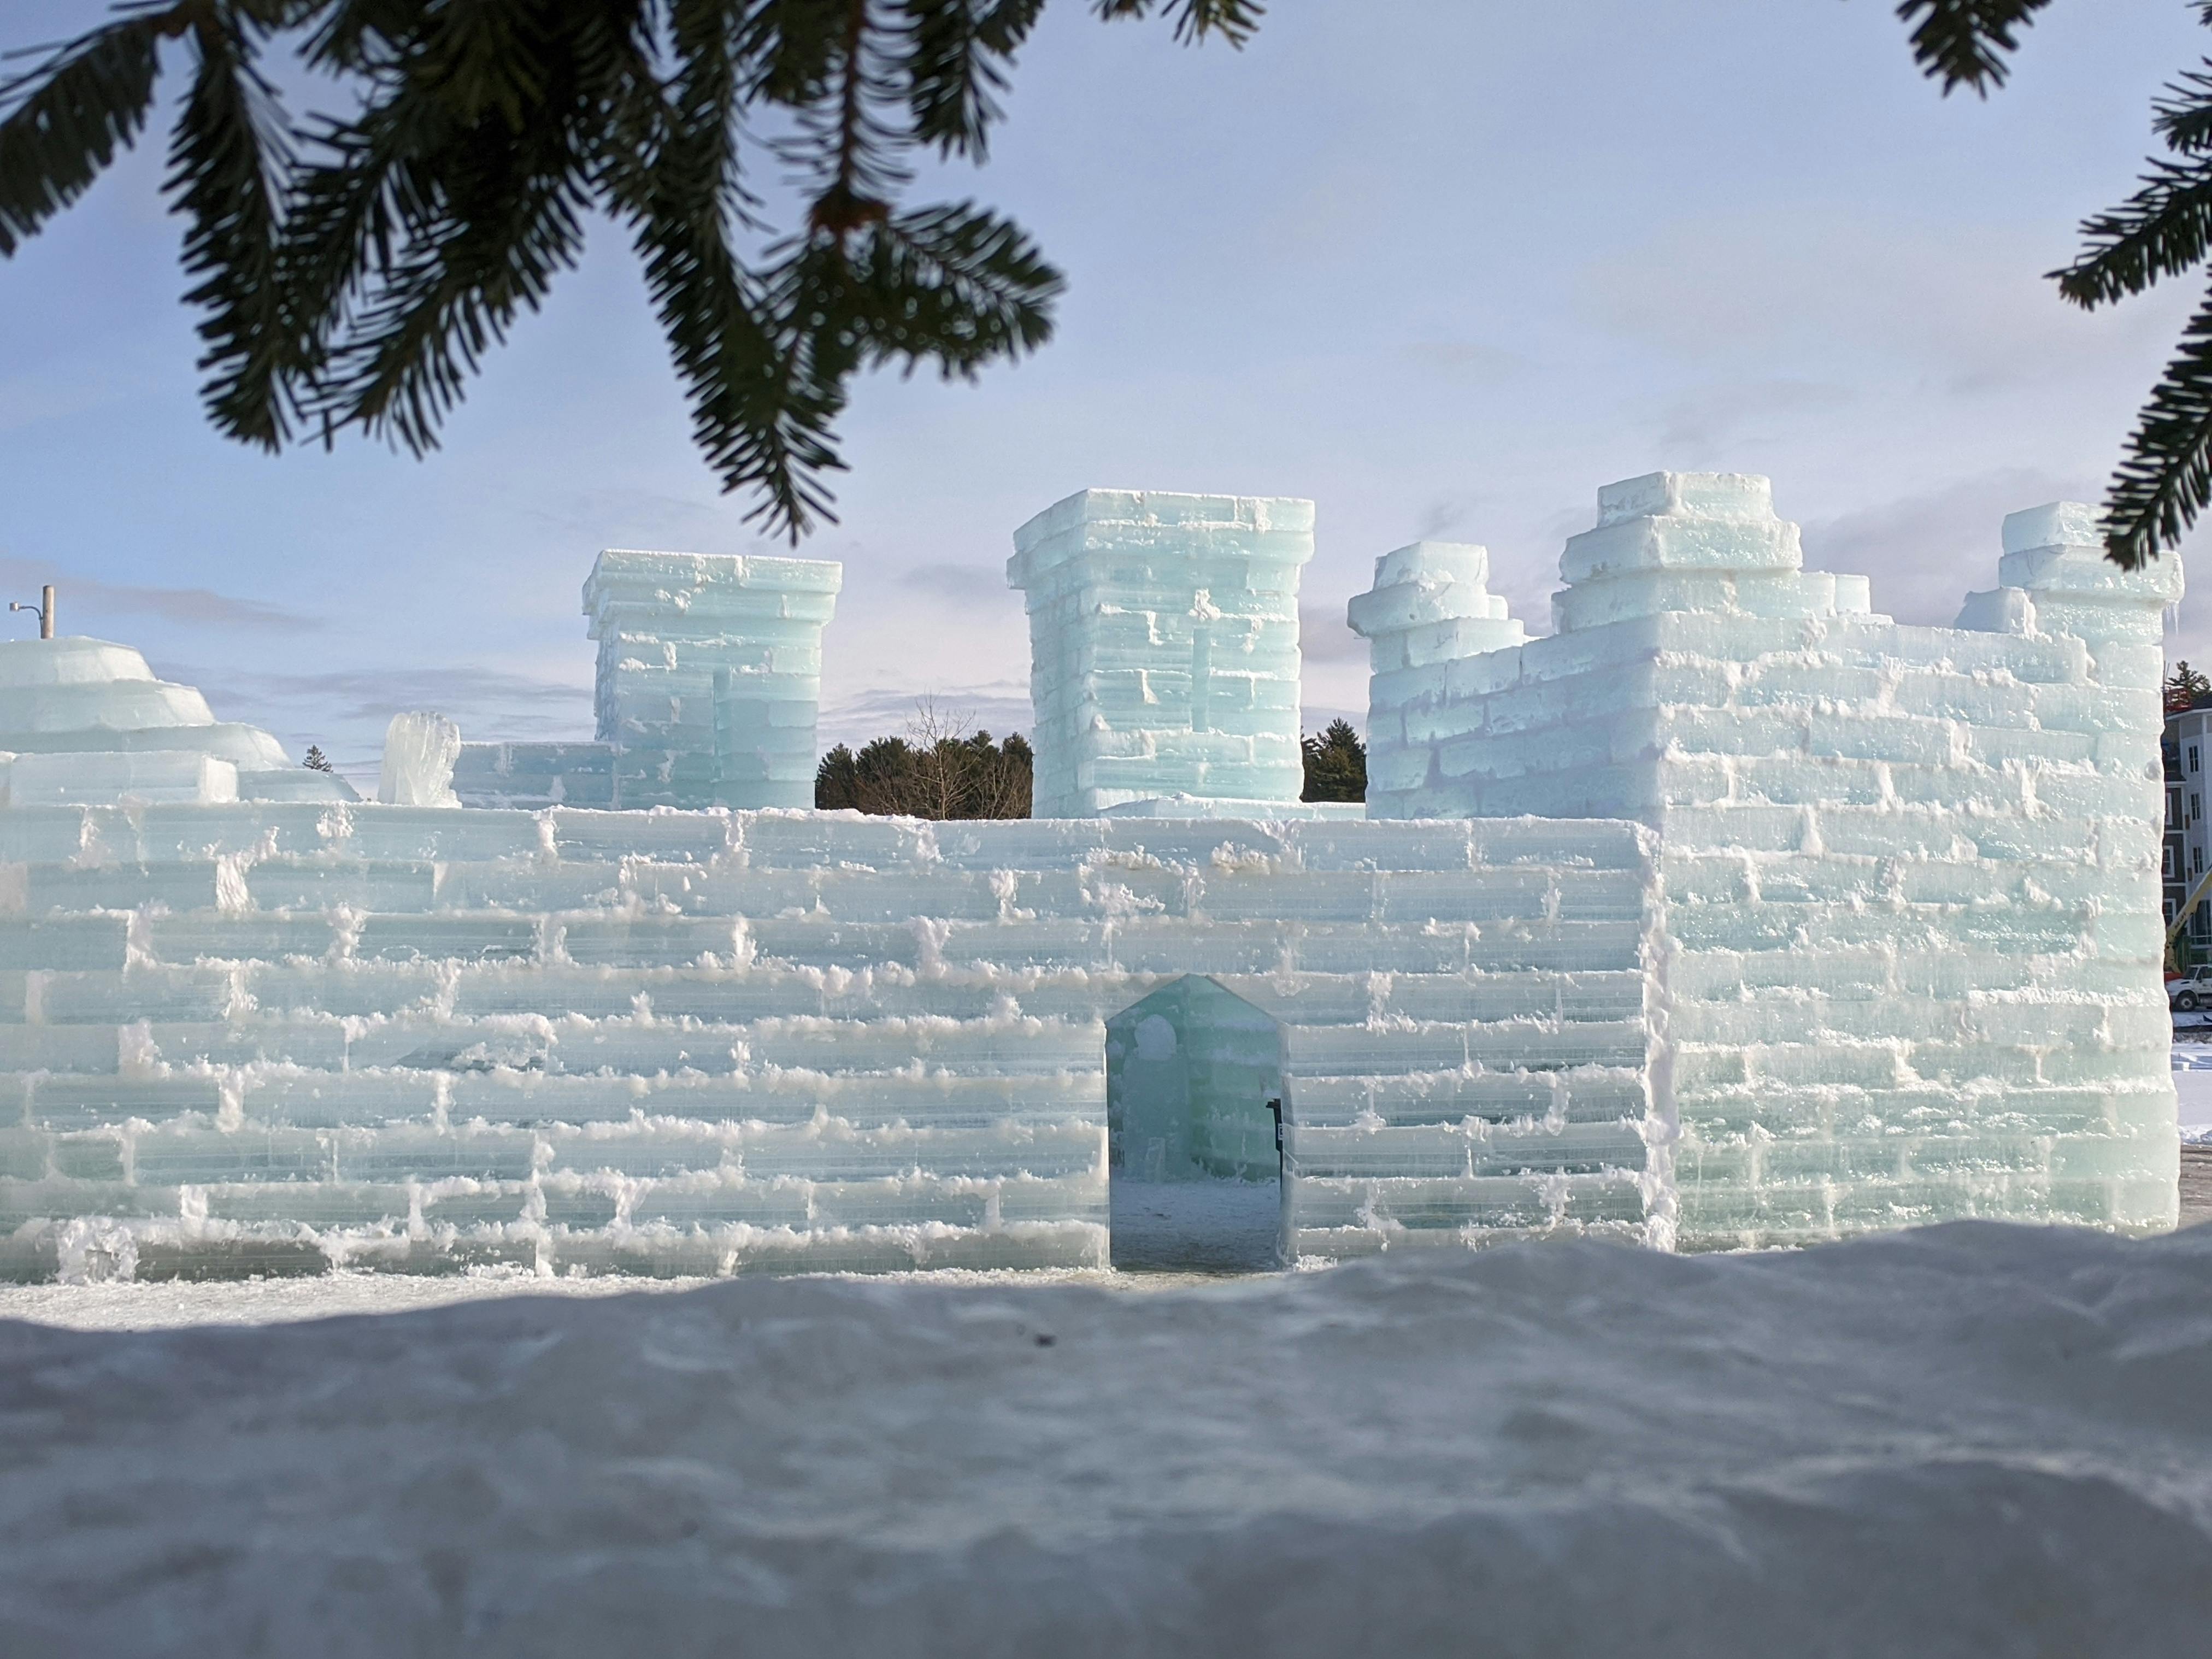 An ice castle rises from the snow on a blue-sky day.